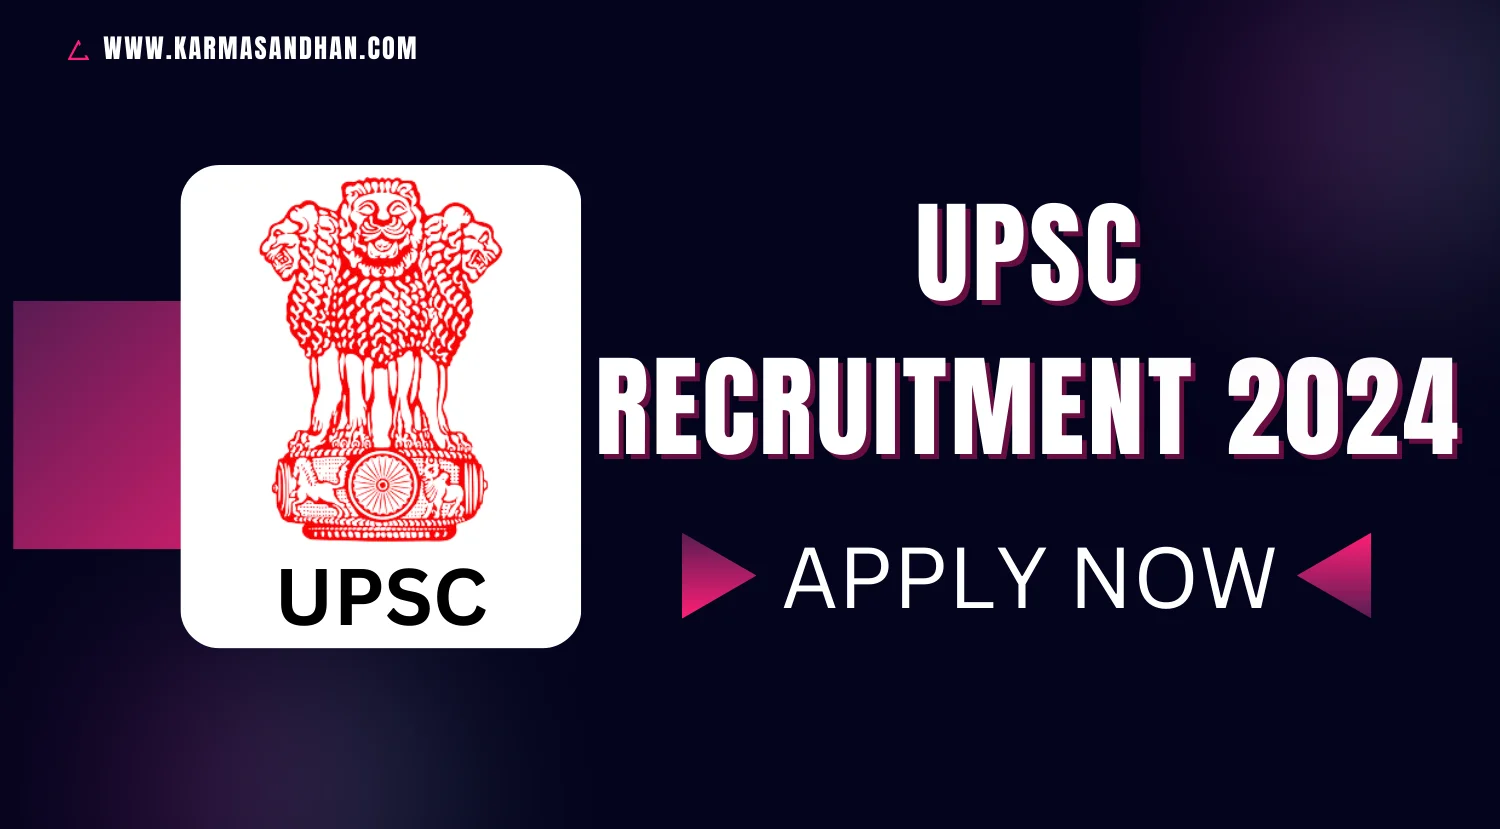 UPSC Recruitment 2024 for Various Director Posts